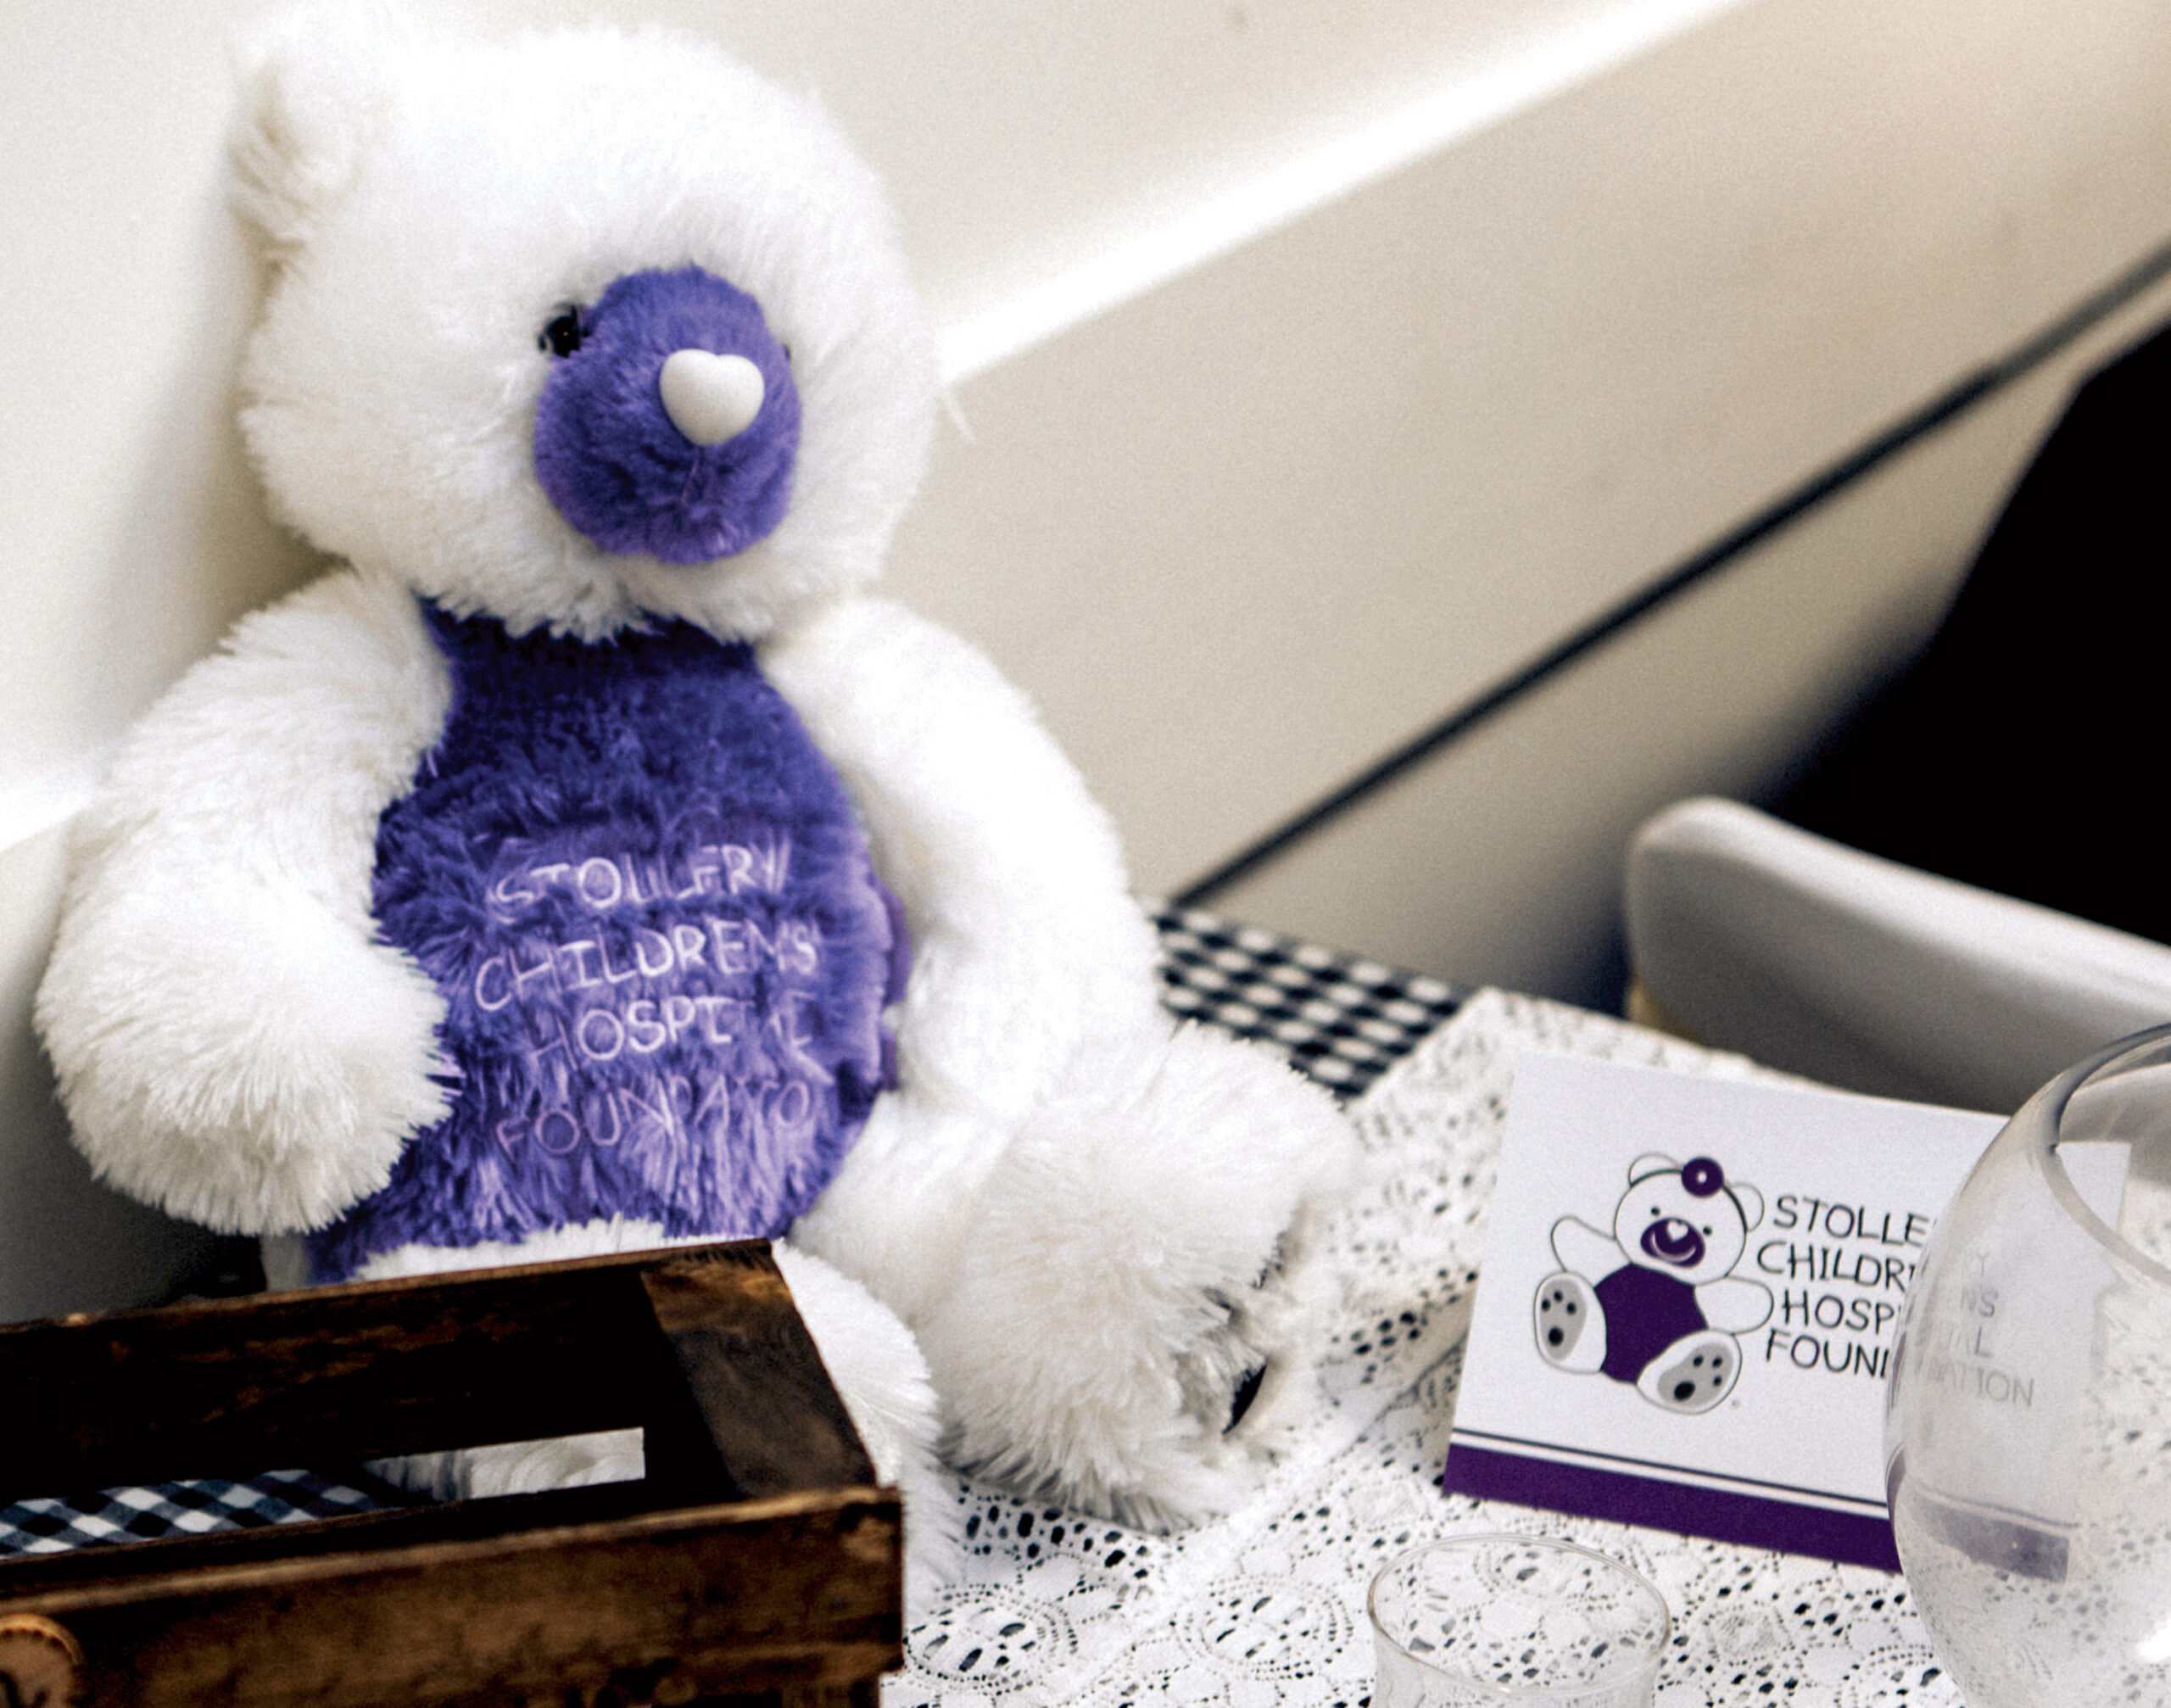 stollery bear on wedding table with cards